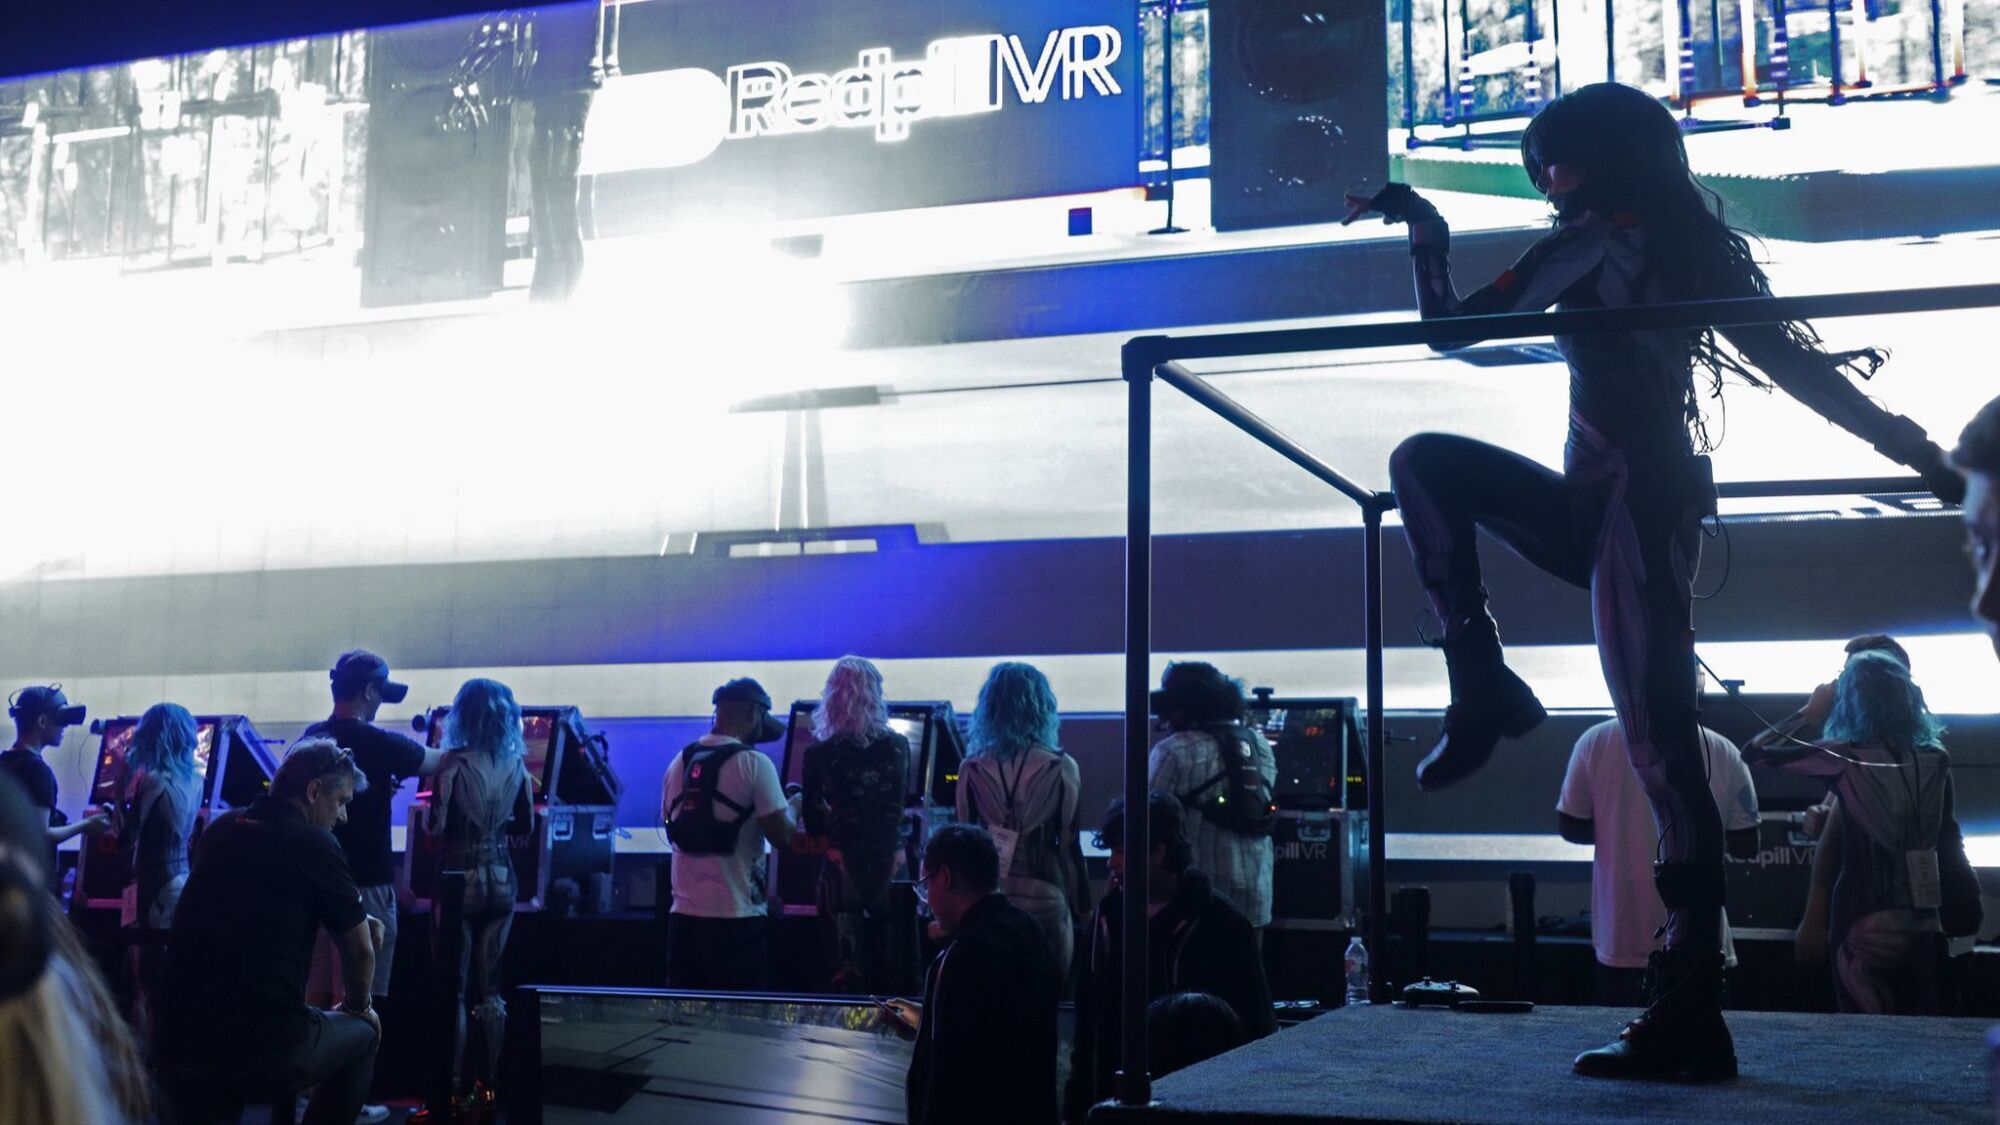 A woman dances on a platform as people gather at consoles below a bank of video monitors